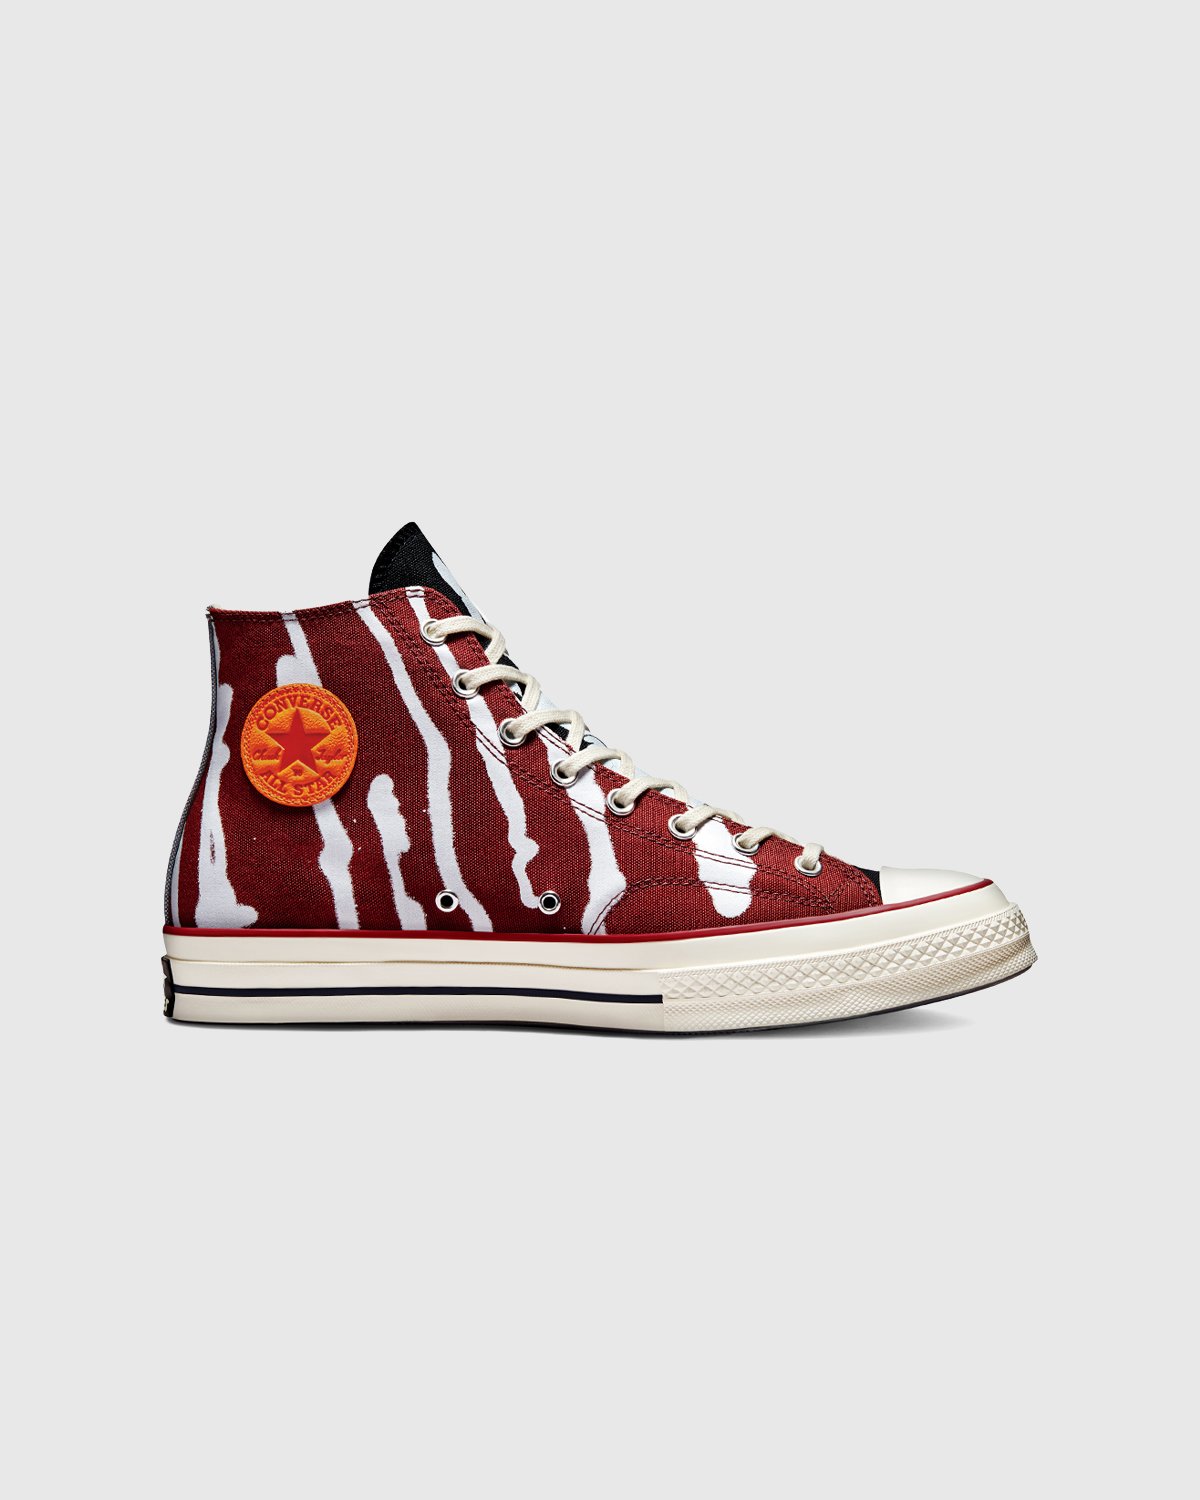 Converse x Come Tees - Chuck 70 Hi White/Multi/Egret - Footwear - Red - Image 1